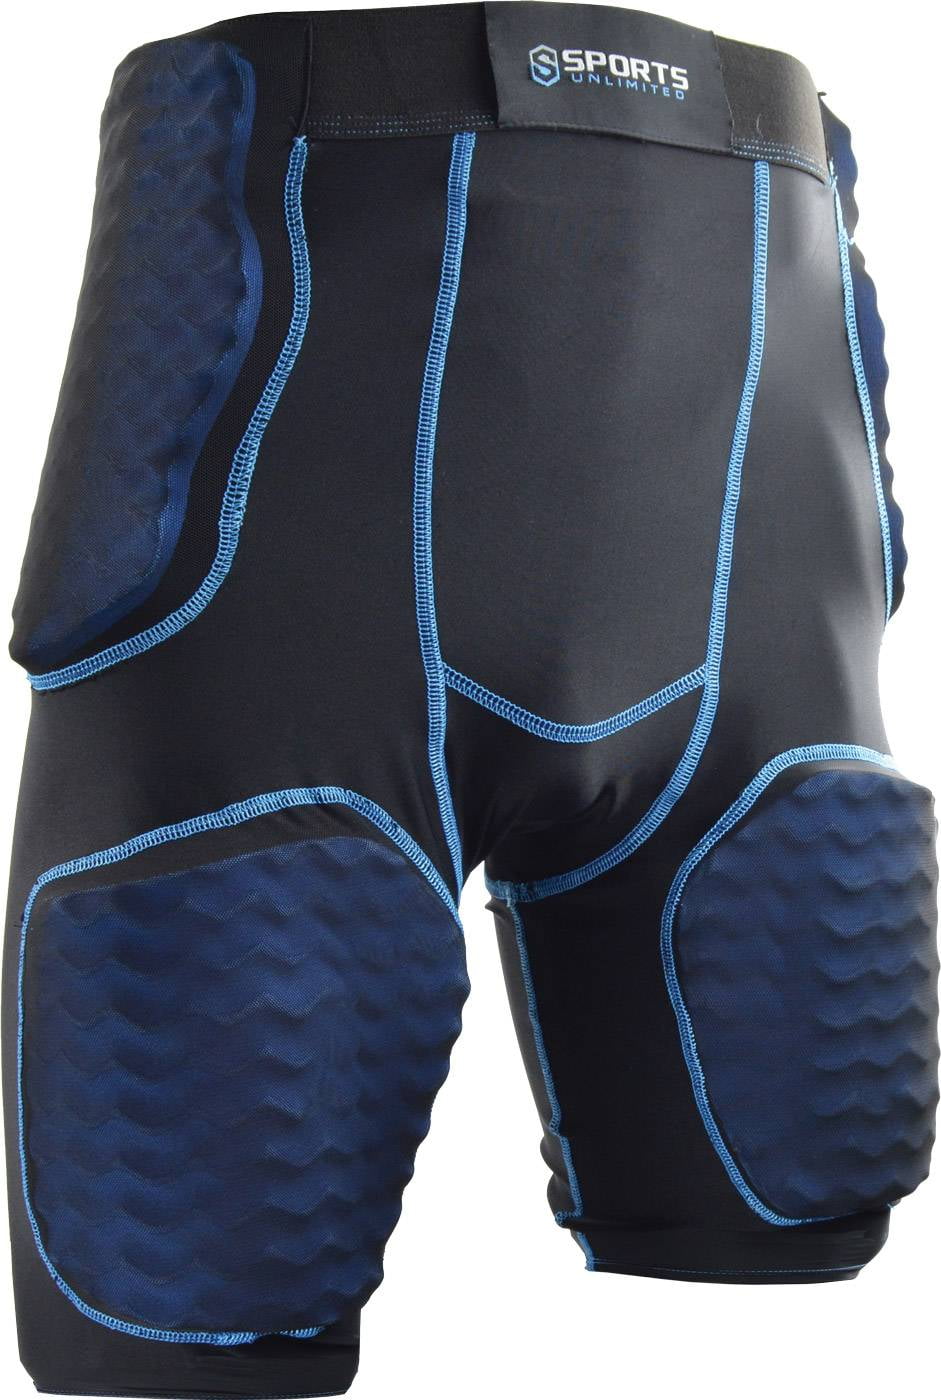 Hard Thigh Pads Sports Unlimited Adult 7 Pad Integrated Football Girdle 